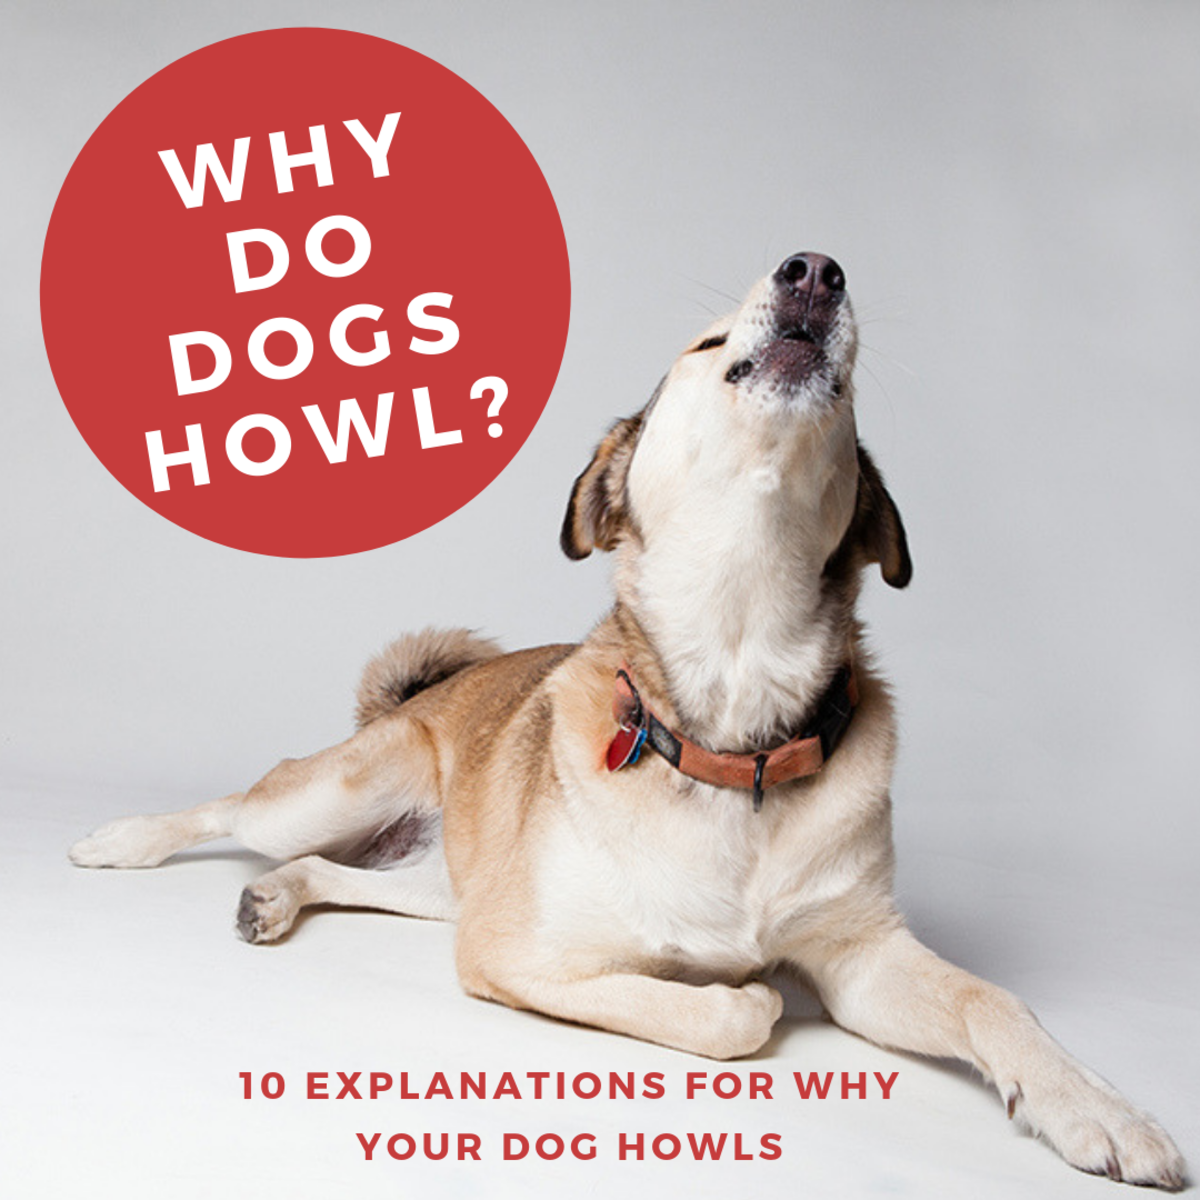 10 Reasons Why Dogs Howl